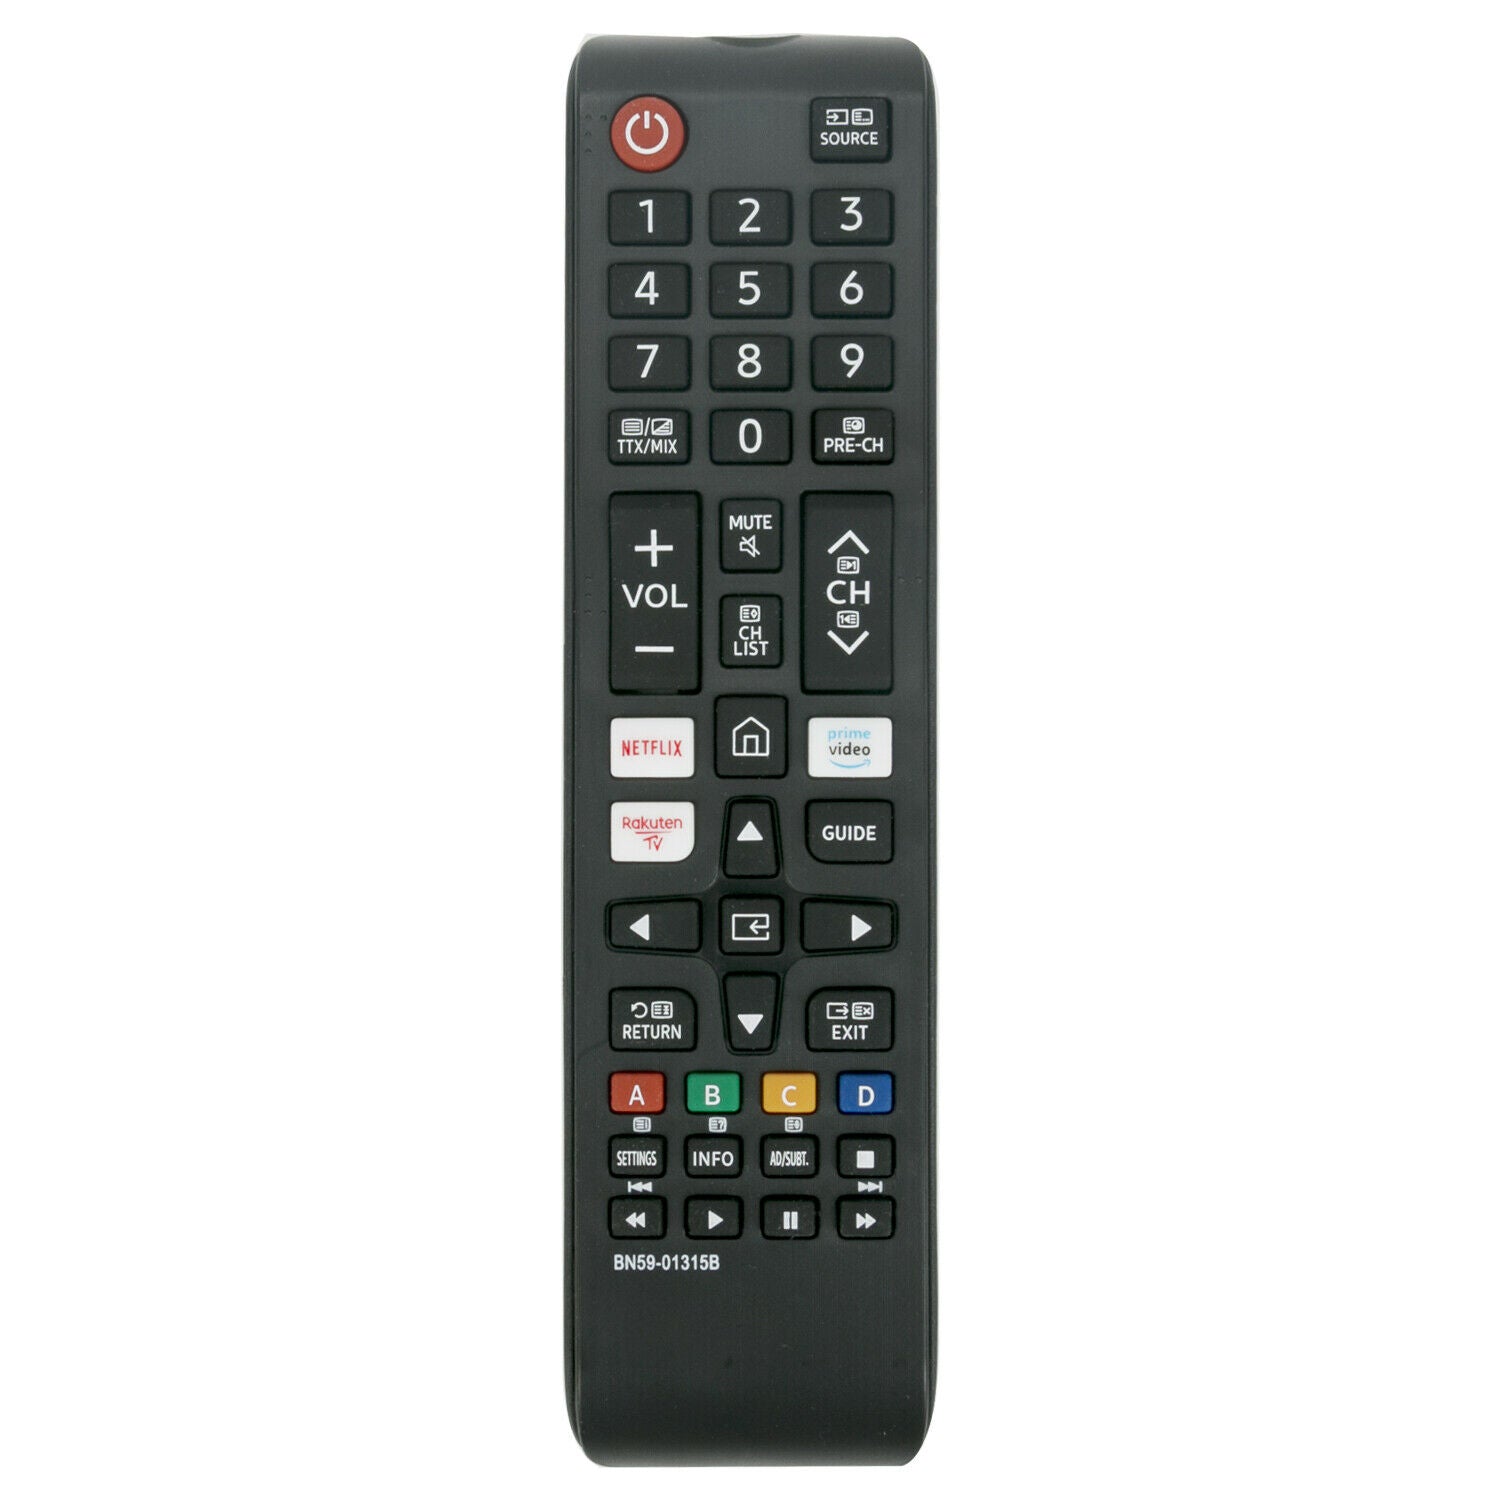 BN59-01315B  Remote Replacement for Samsung TV with Netflix Prime Video Raukten Buttons